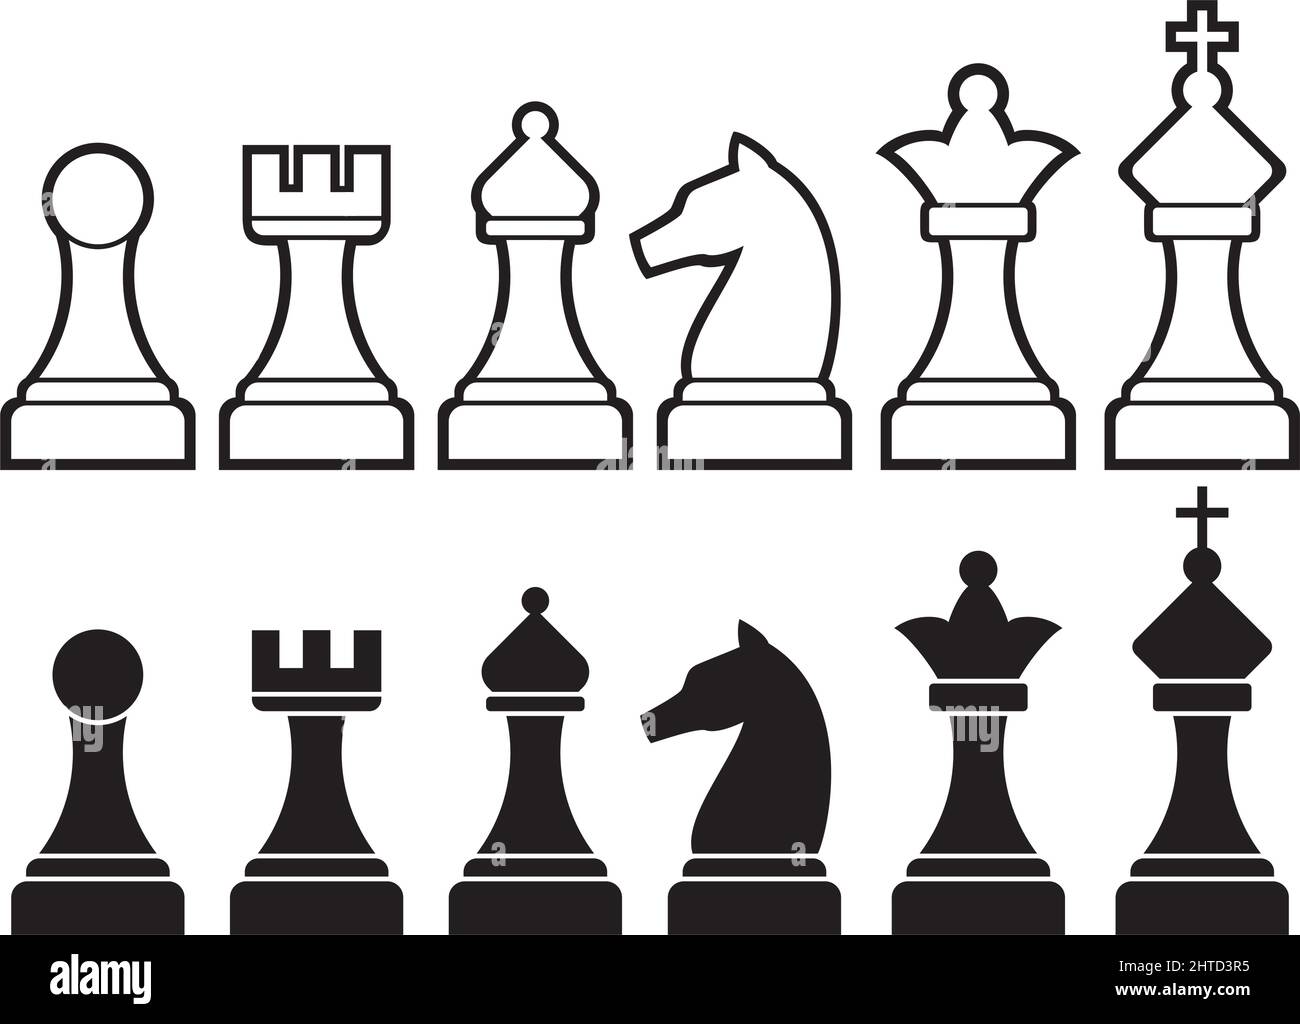 Chess pieces including king, queen, rook, pawn, knight, and bishop. Vector illustration. Stock Vector